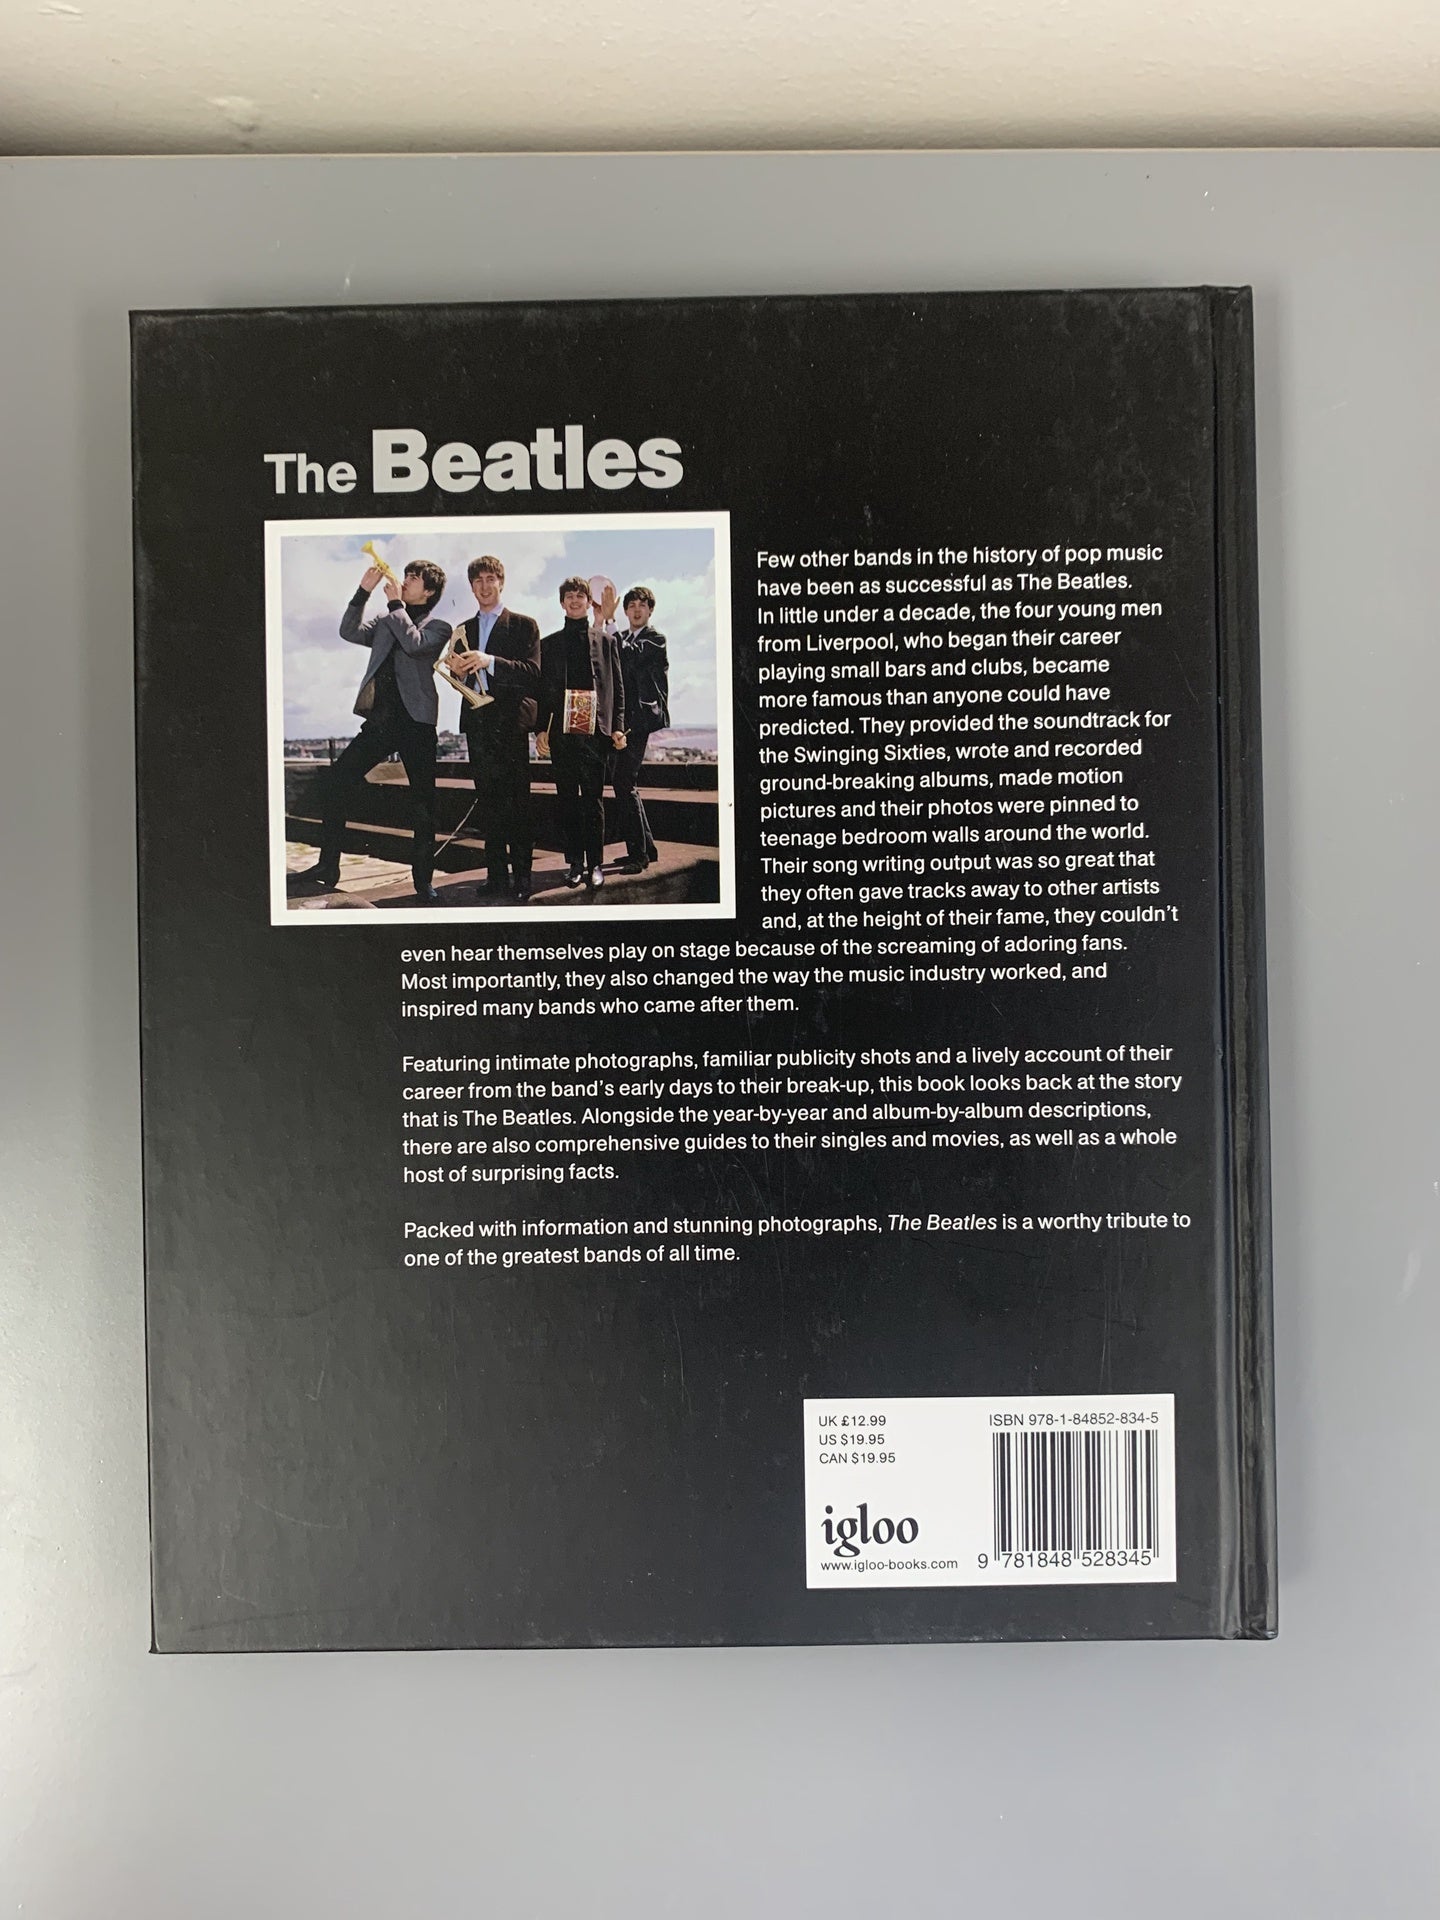 The Beatles book